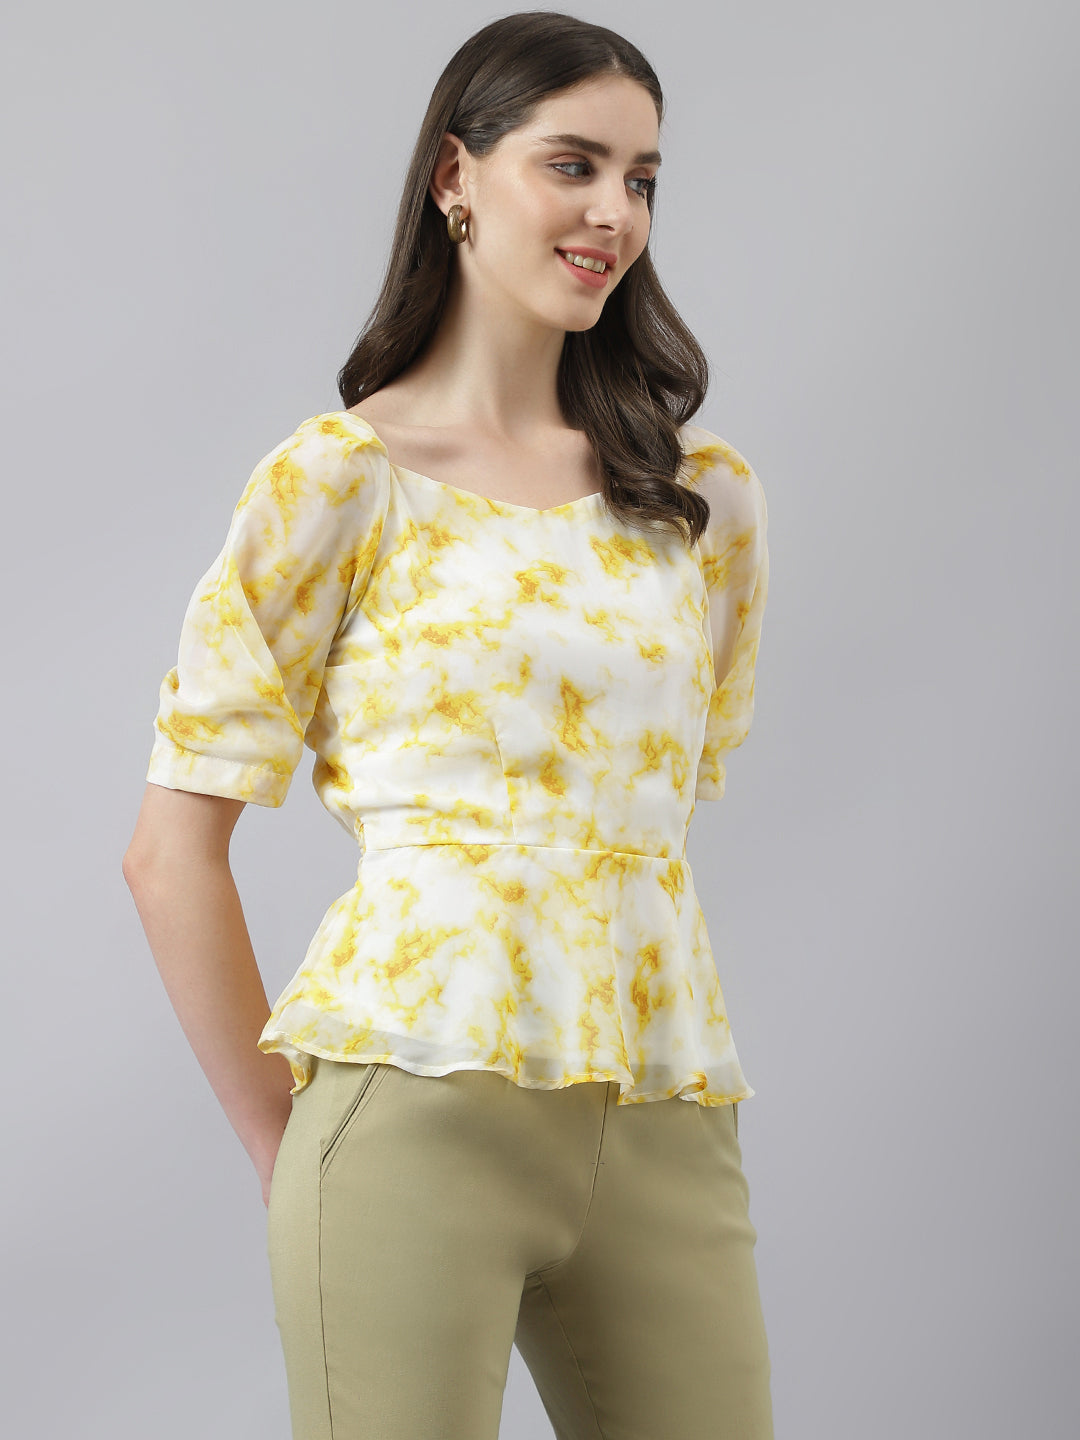 Yellow Printed Peplum Top With Puffer Sleeves